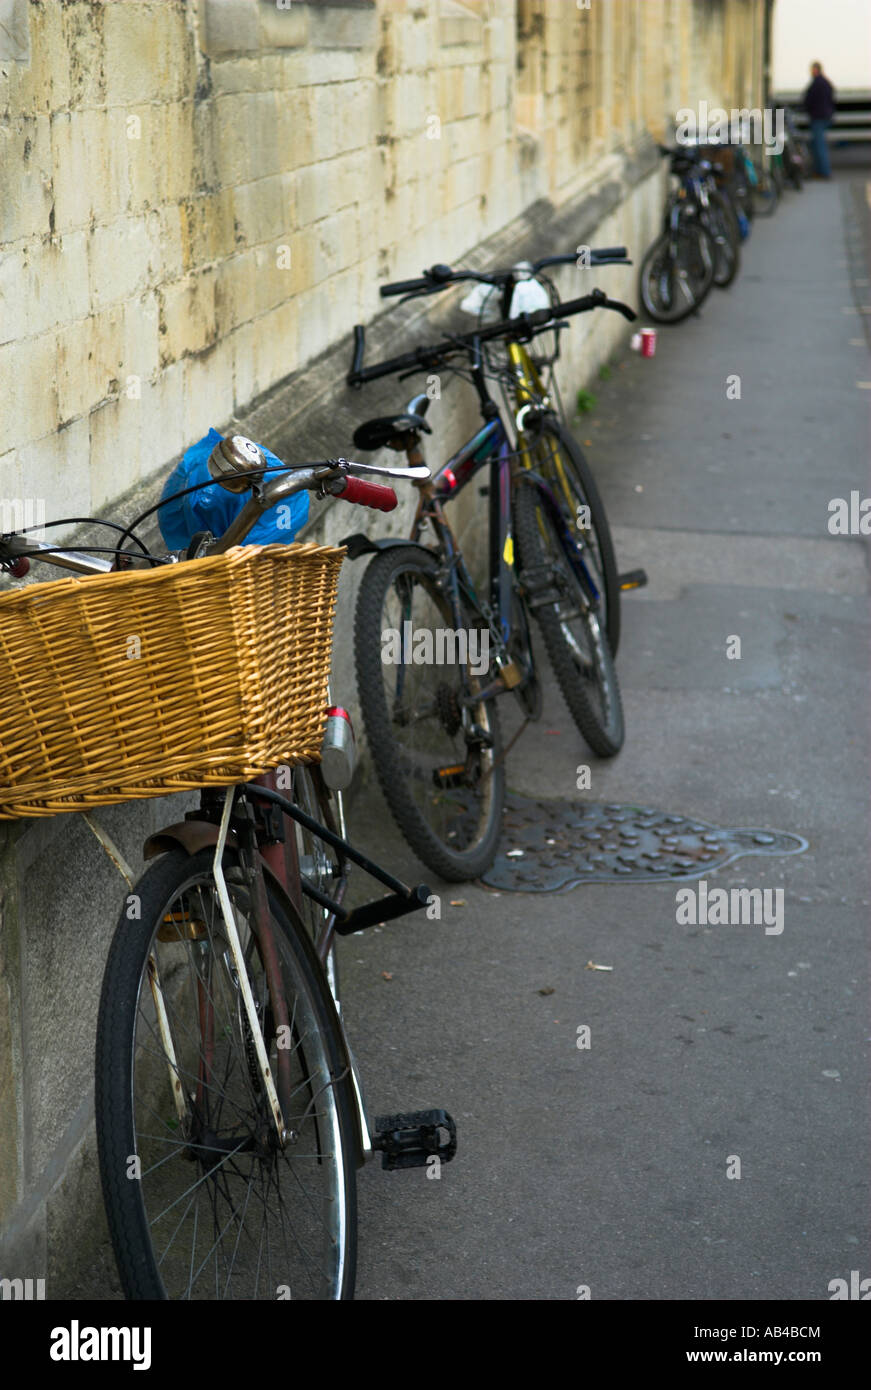 Row of black bicycles parked on pavement against building along street Oxford England Stock Photo